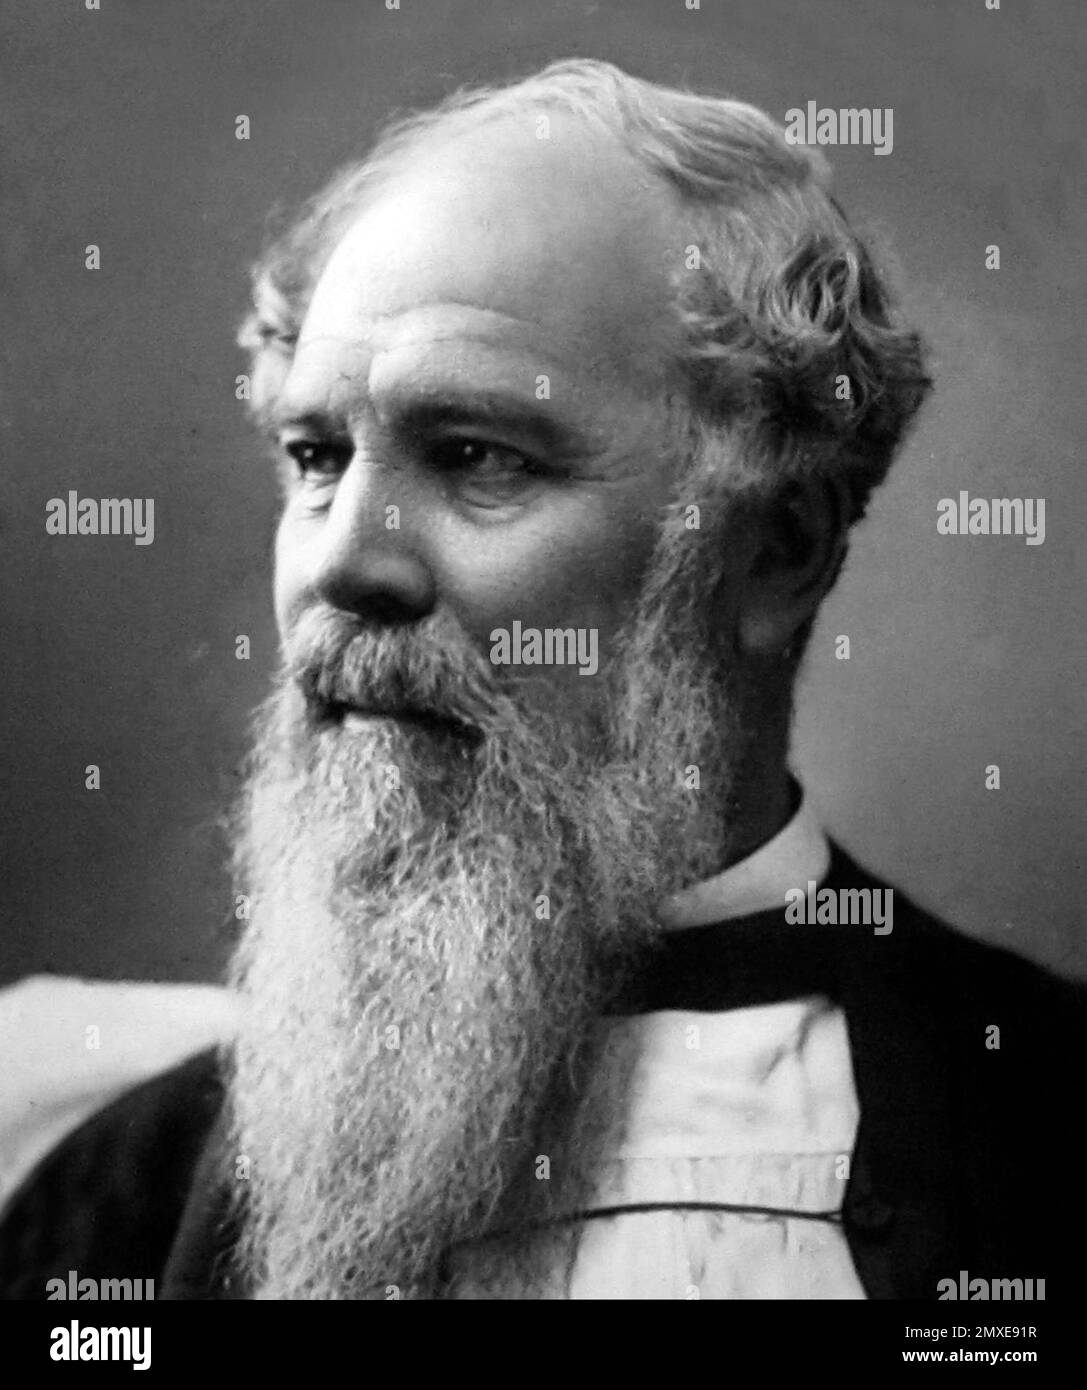 John Charles Ryle, Bishop of Liverpool, Victorian period Stock Photo